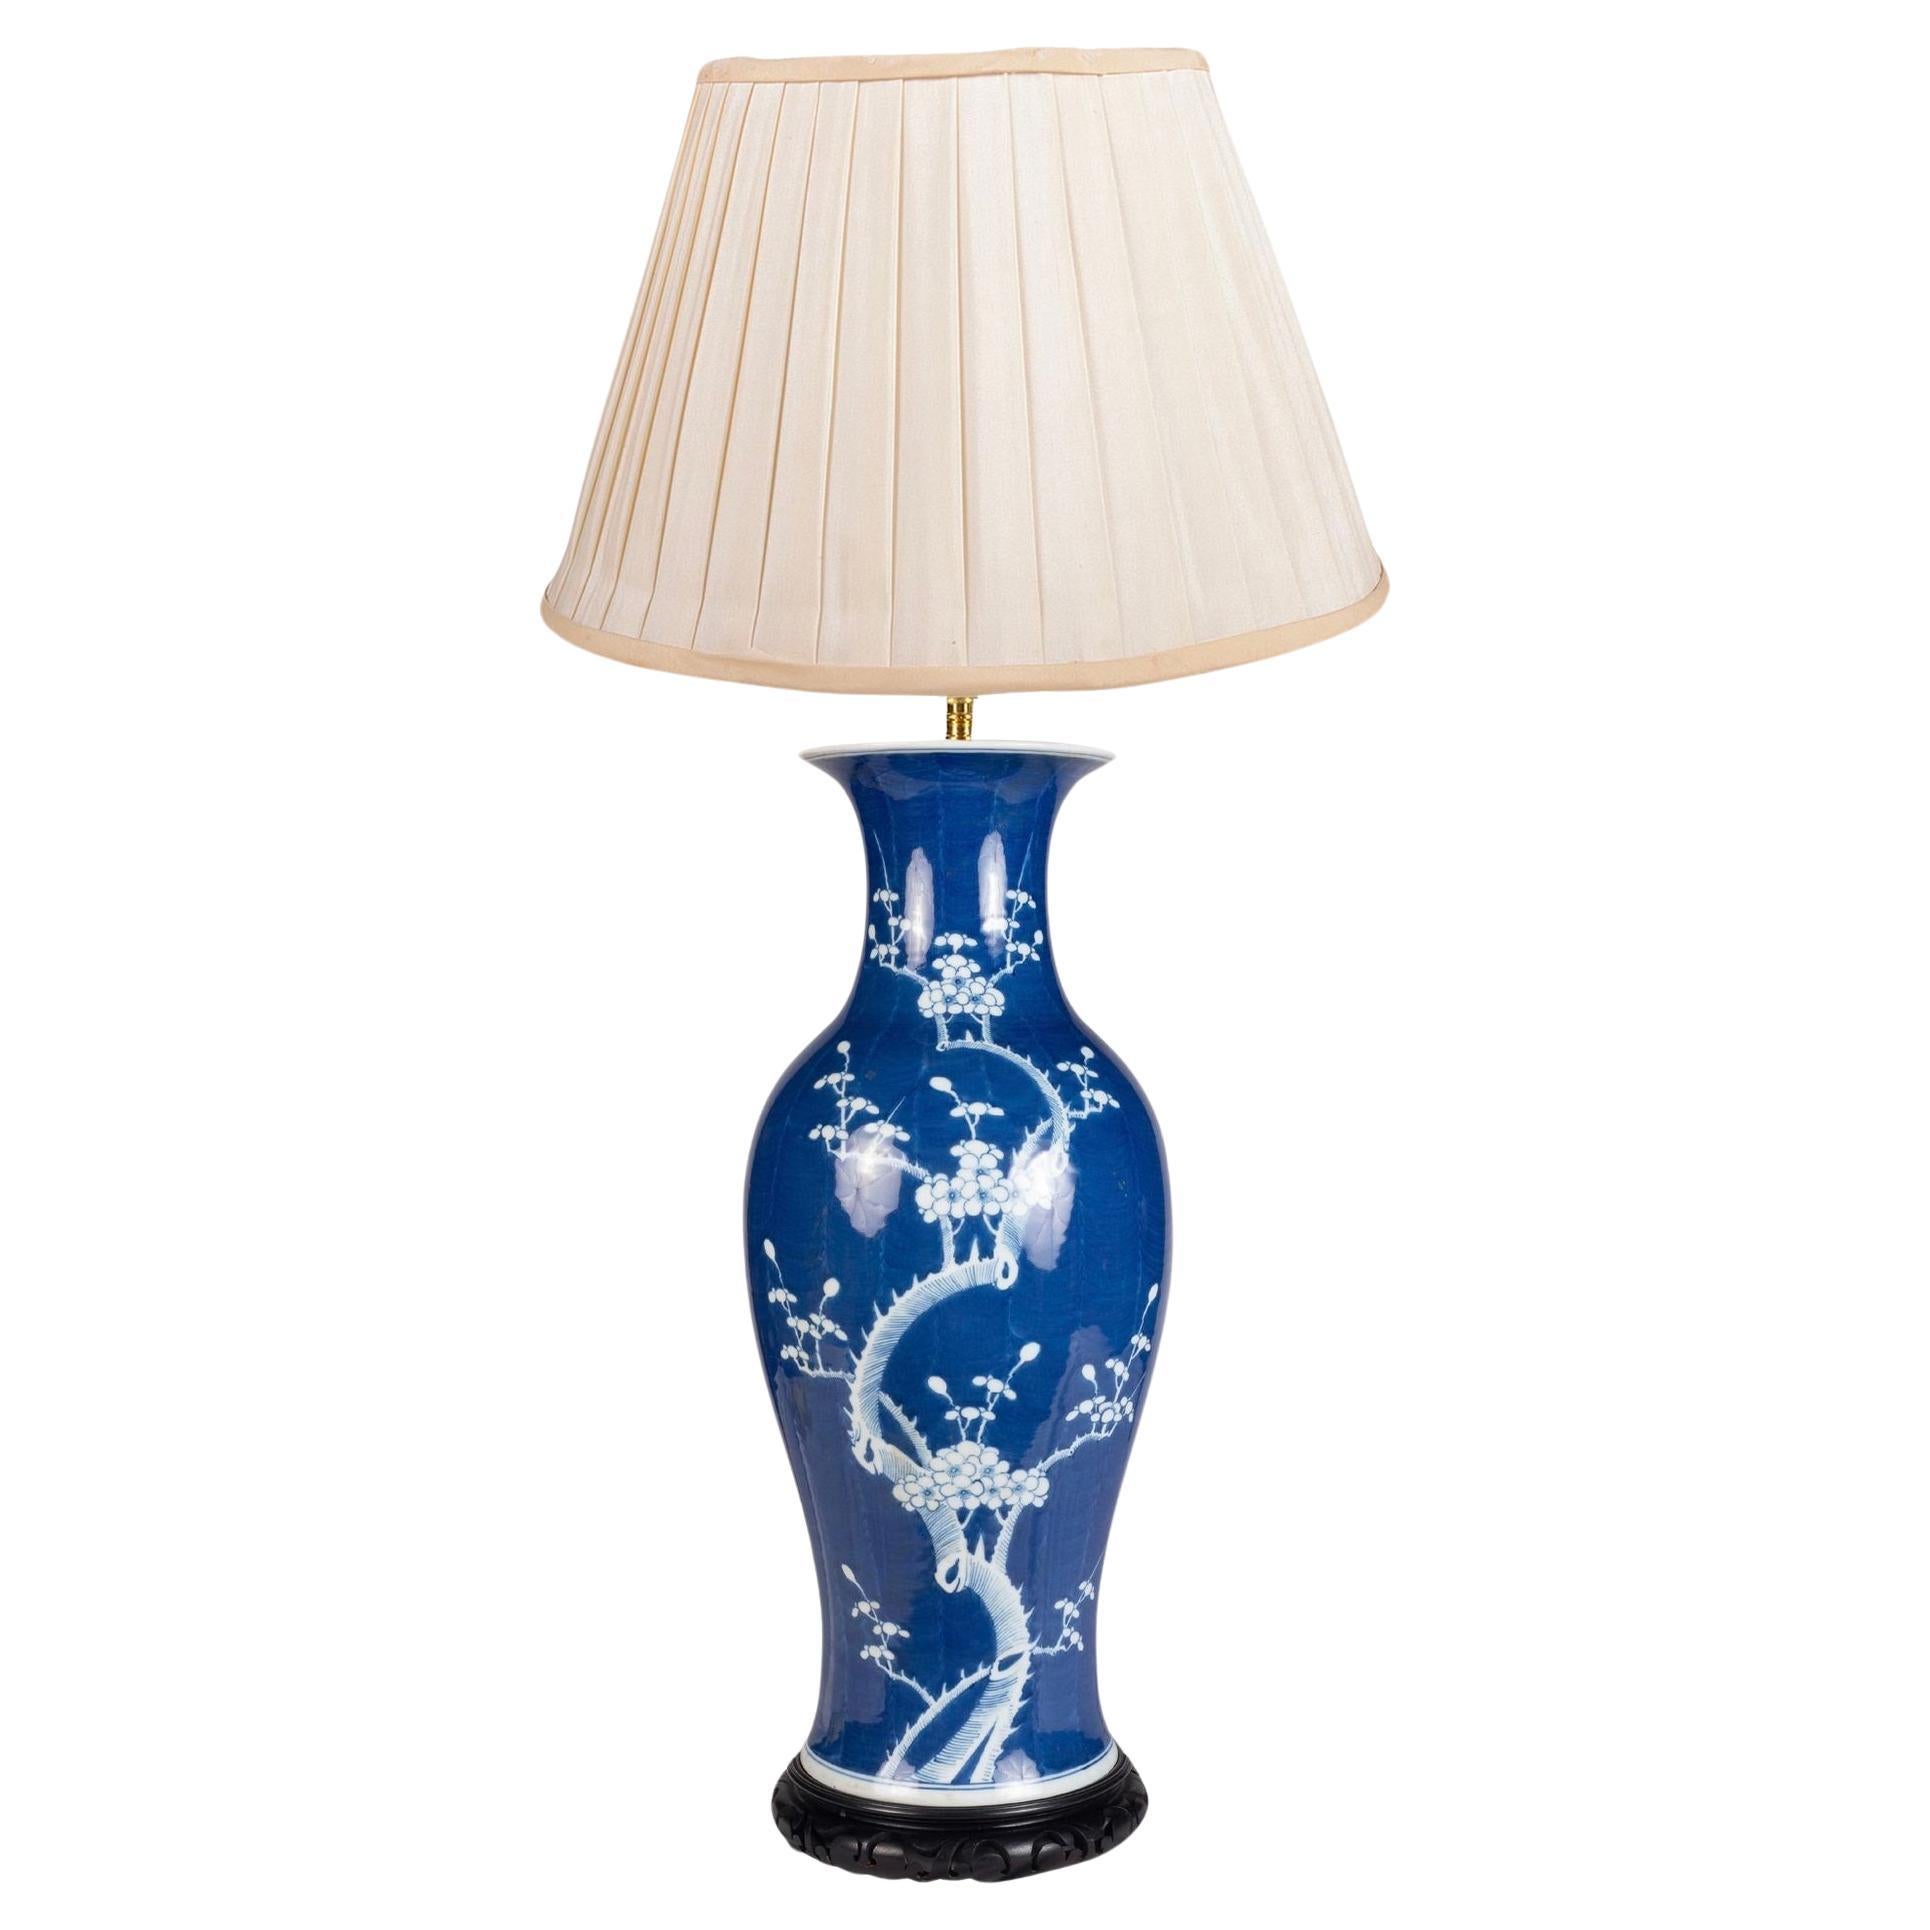 Chinese Blue and White Prunus blossom vase/lamp, circa 1890. For Sale